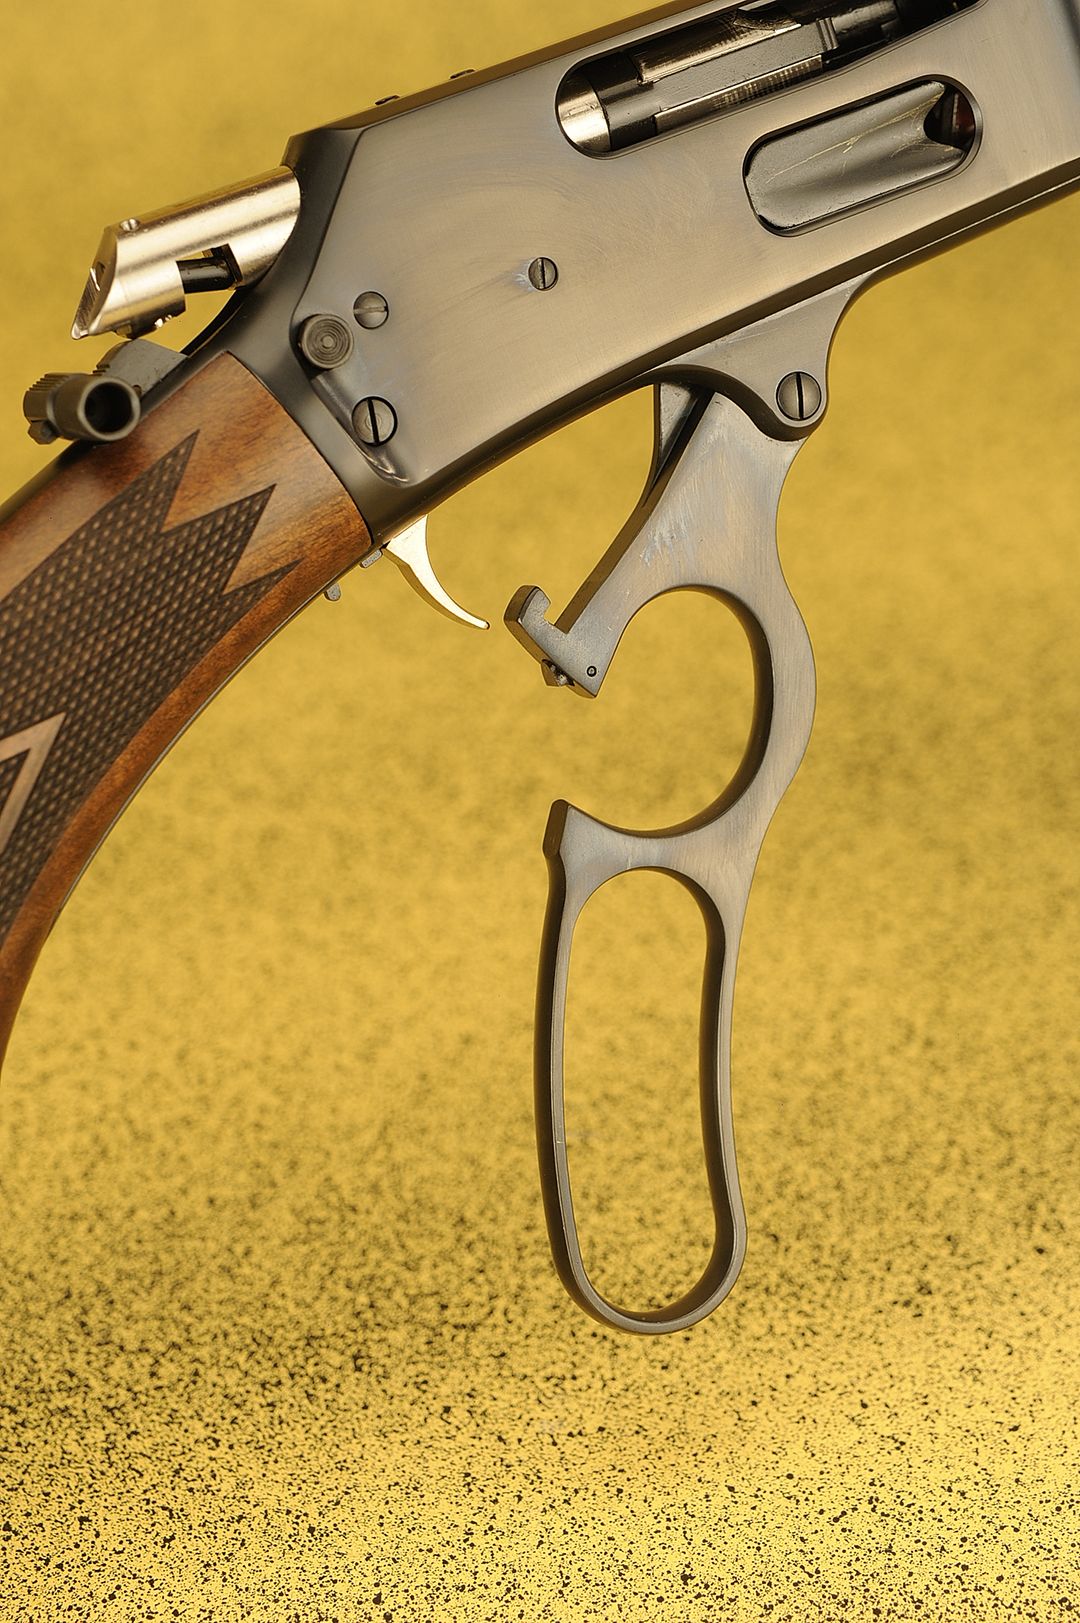 Forged from alloy steel, the lever is polished and blued to match the gun. The trigger is gold plated.